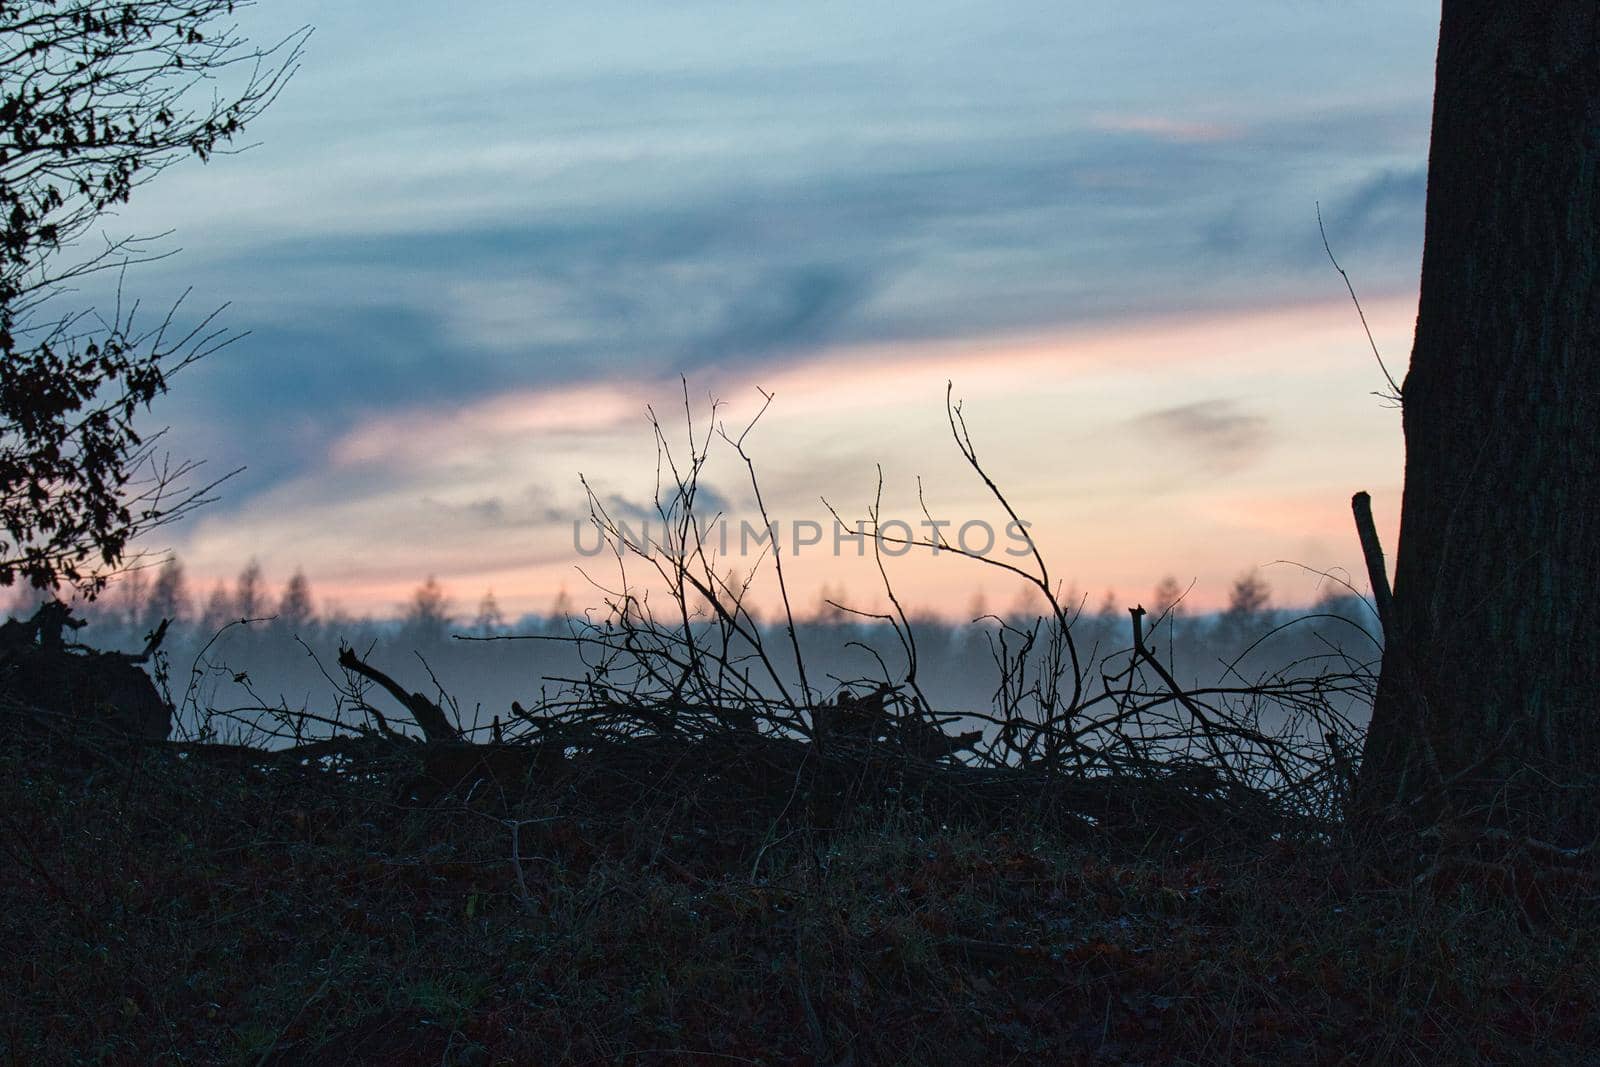 Shallow focus shot of a silhouette of branches and twigs at sunset